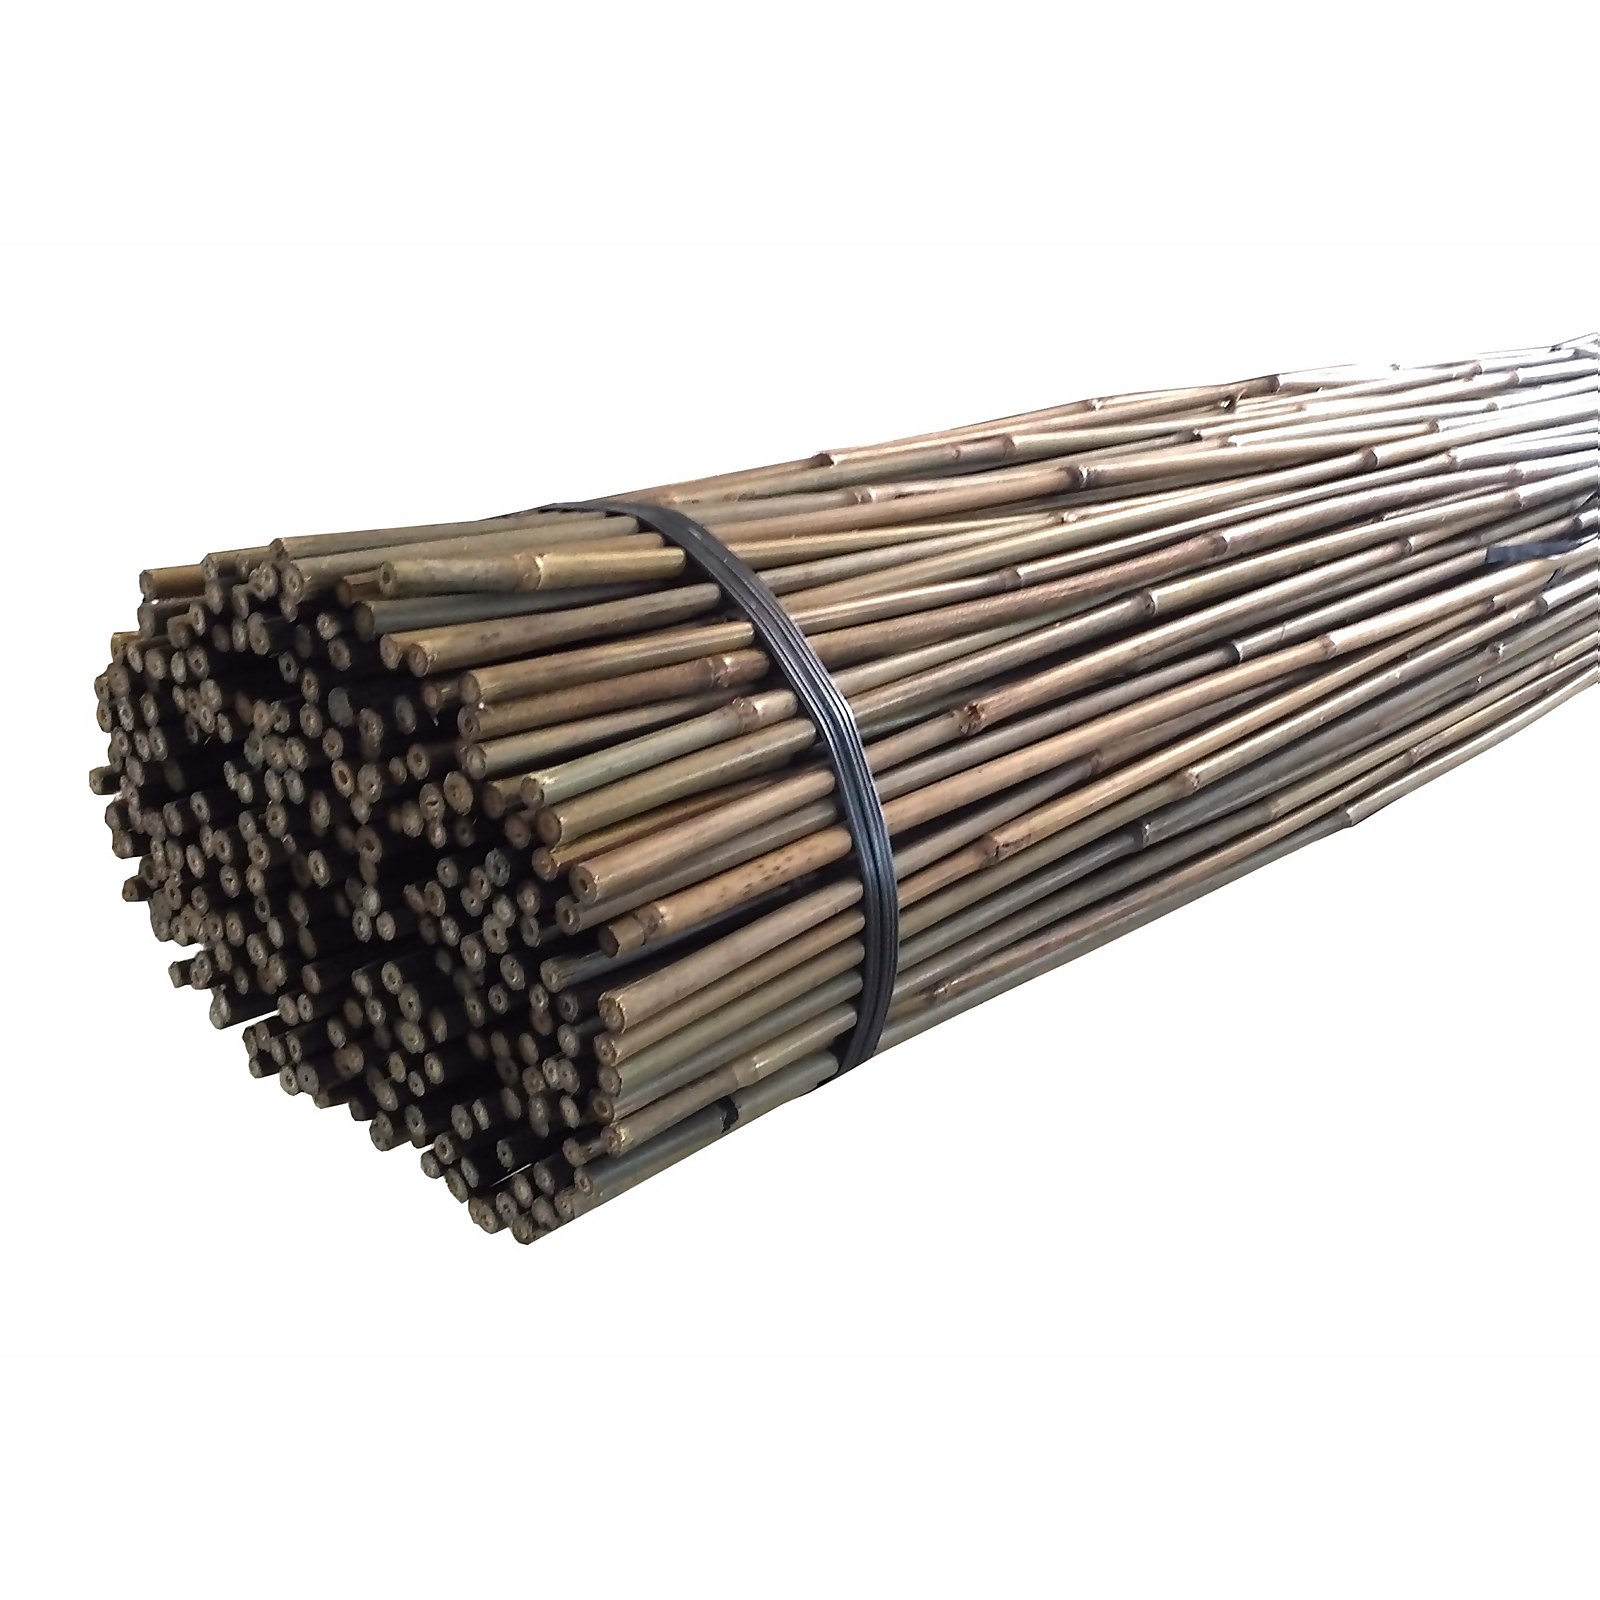 Photo of 10 Pack Bamboo Canes - 1.8m/6ft